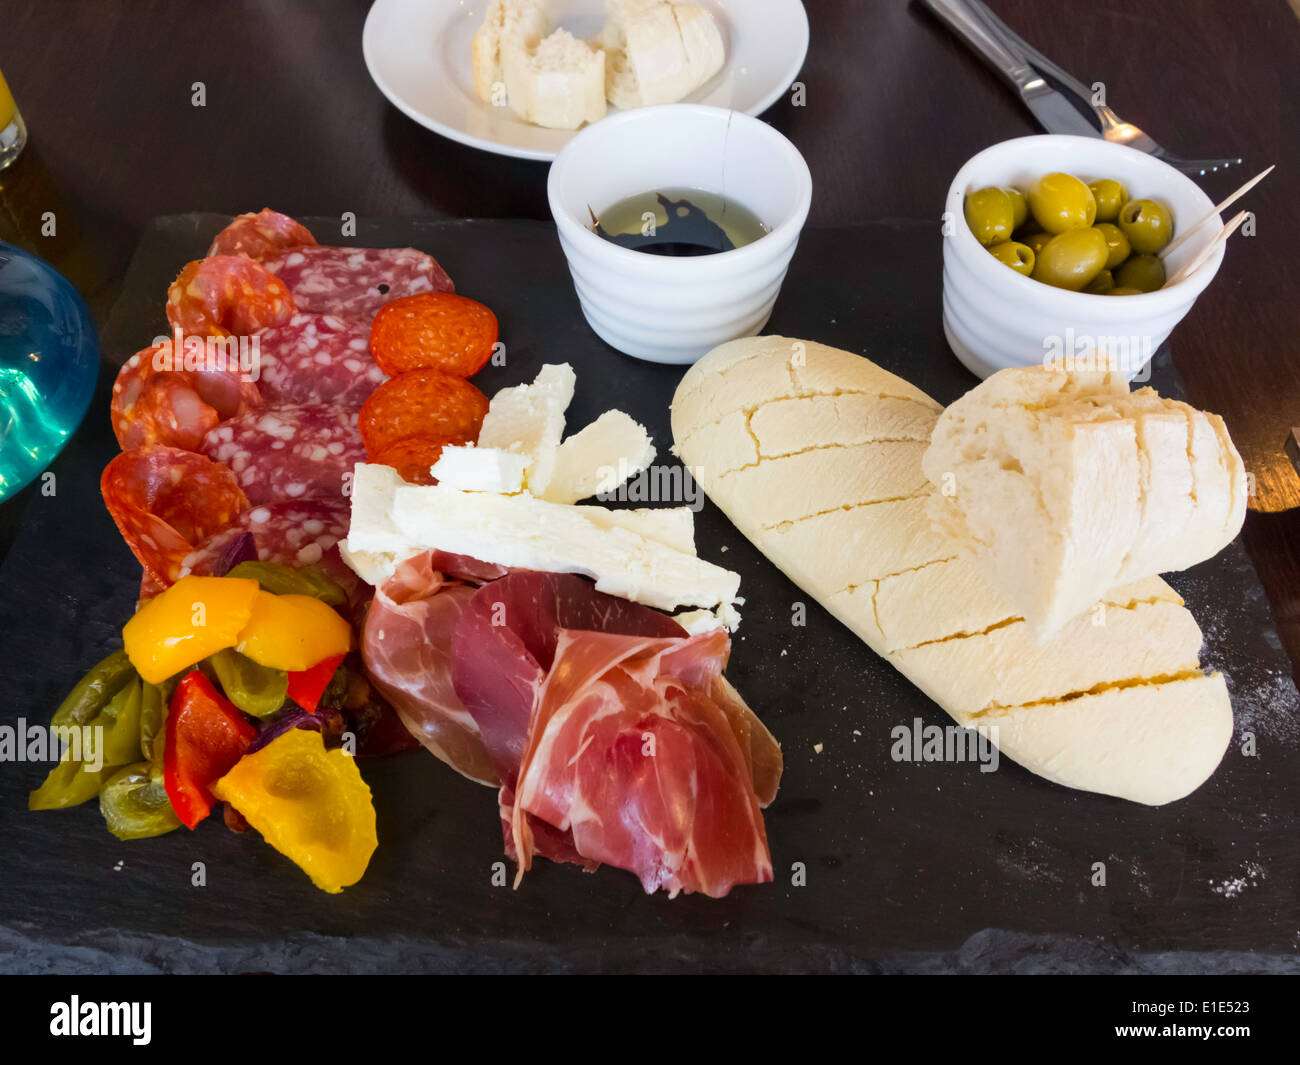 Lunch time snack meal deli platter cold meats mozzarella cheese Ciabatta bread olive oil olives and pickled peppers Stock Photo